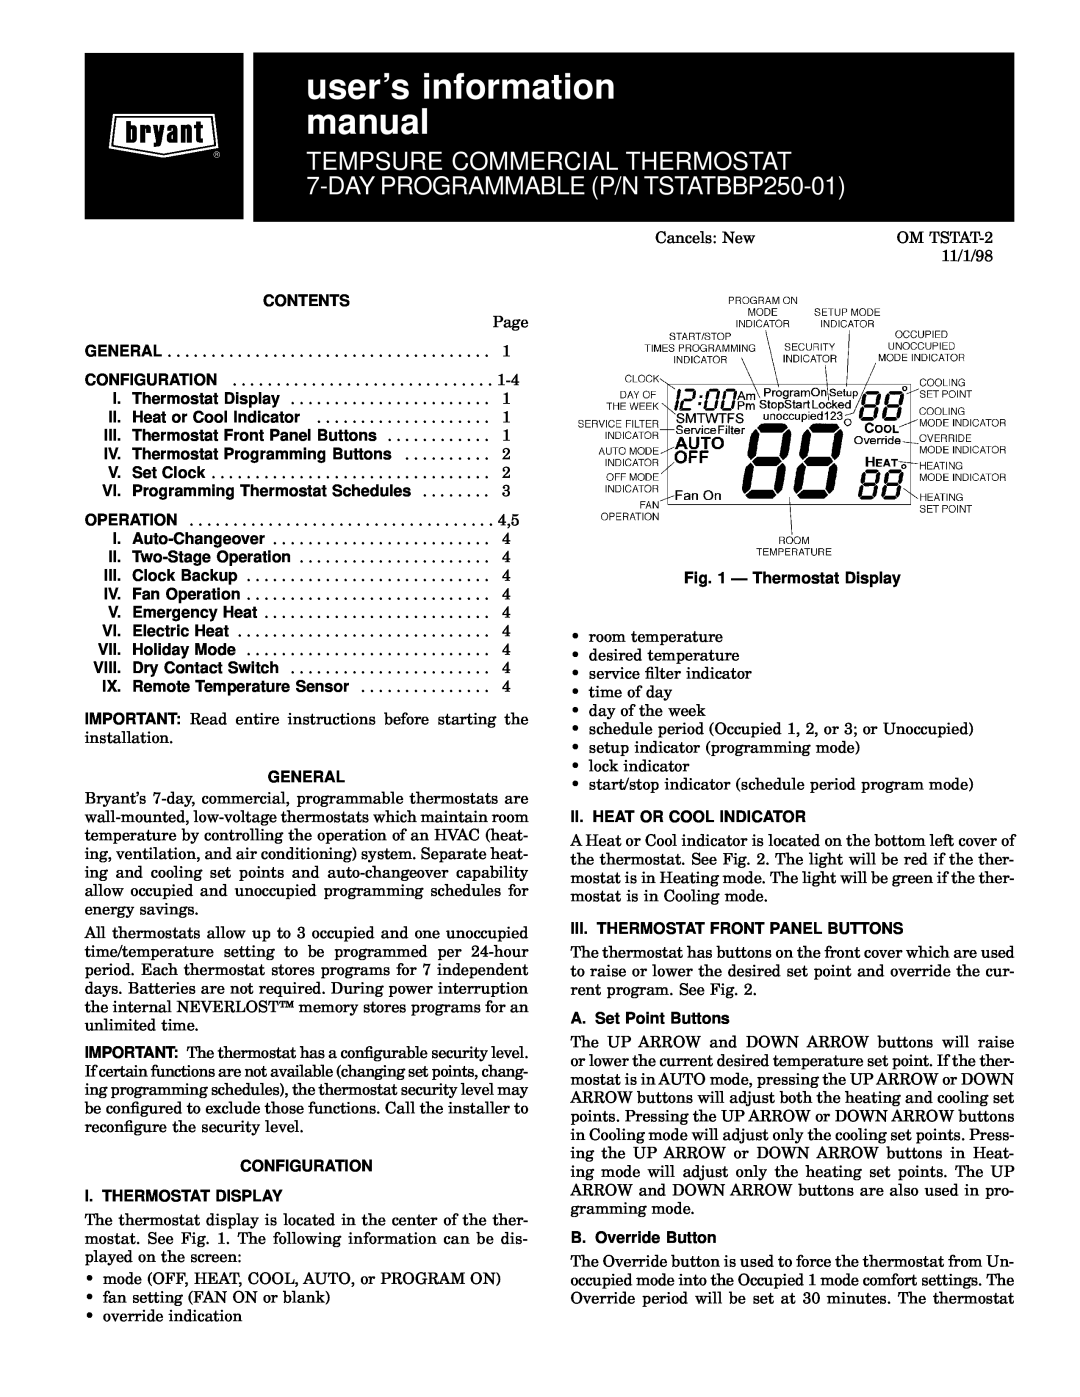 Bryant P manual Contents, General, Configuration I. Thermostat Display, Ð Thermostat Display, Ii. Heat Or Cool Indicator 